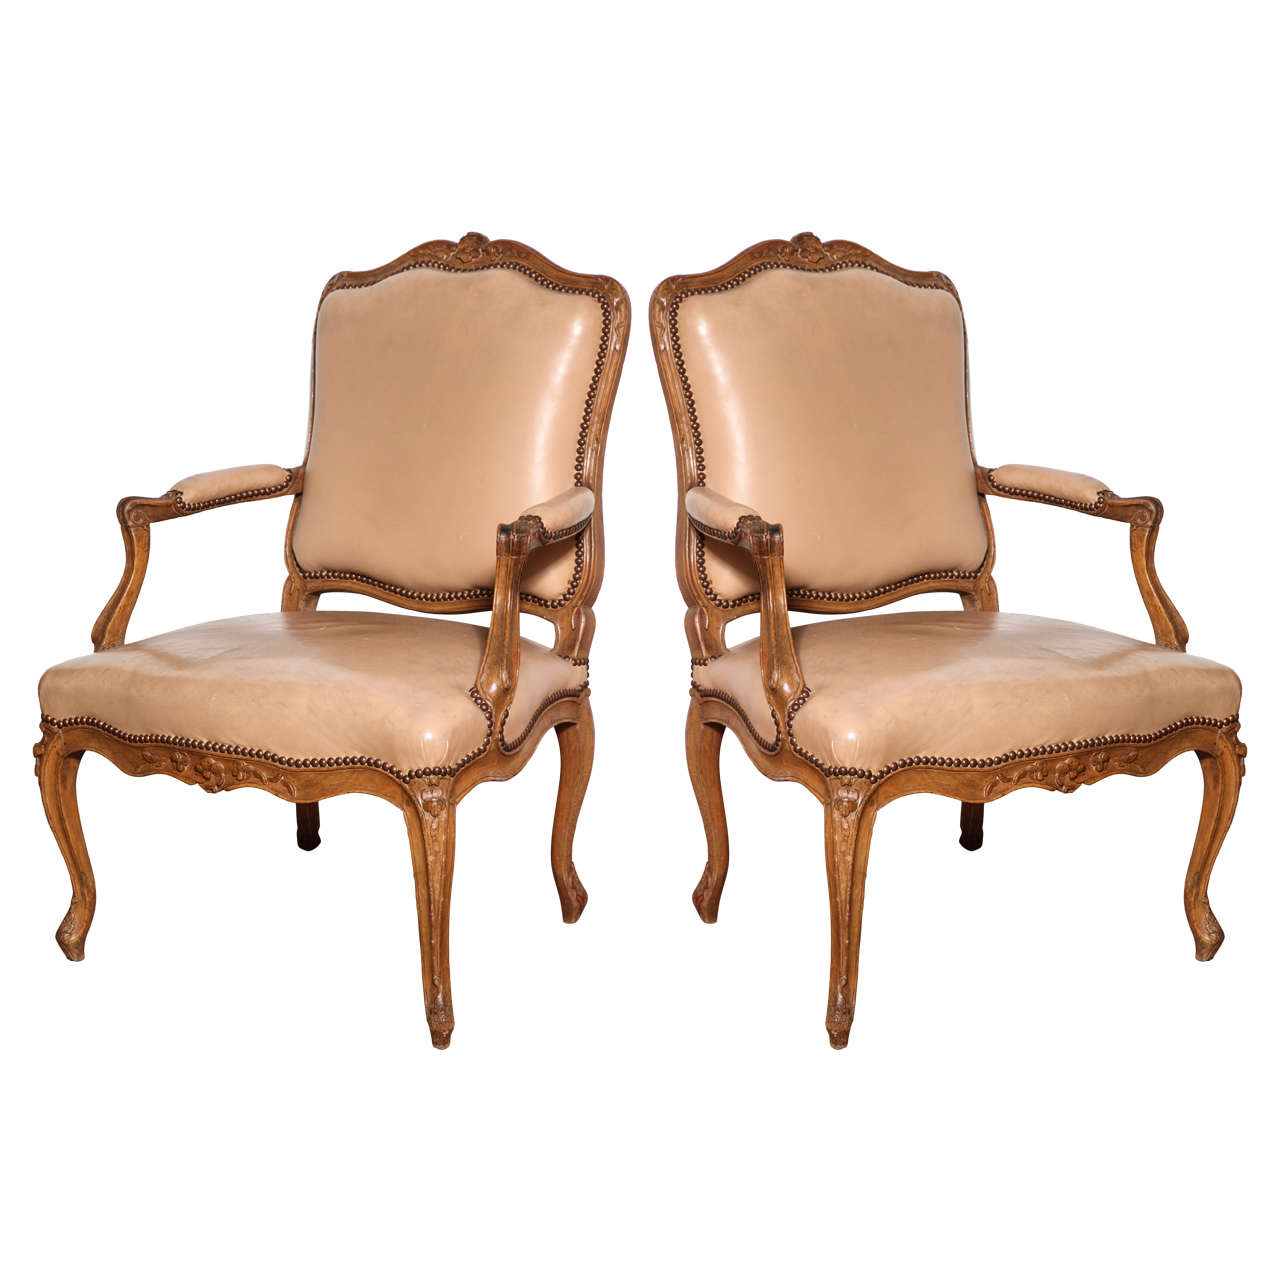 A Pair of Louis XV Carved Beechwood Fauteuils. France c. 1750 For Sale